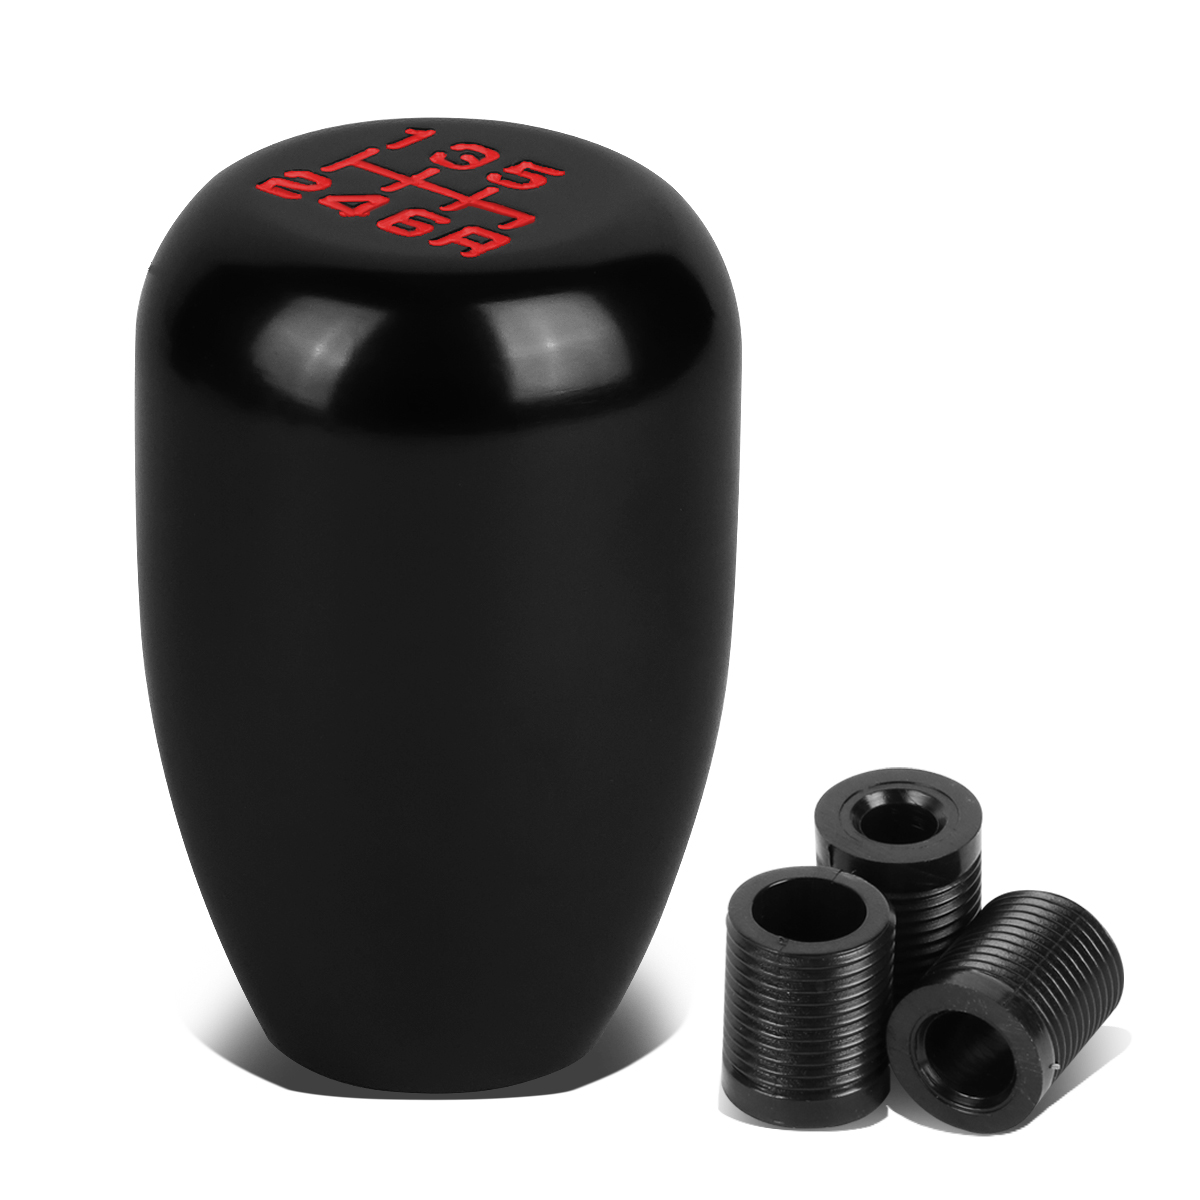 Aluminum Type-R Style 6-Speed Manual Transmission Shift Knob - $9.25 with Free Prime Shipping